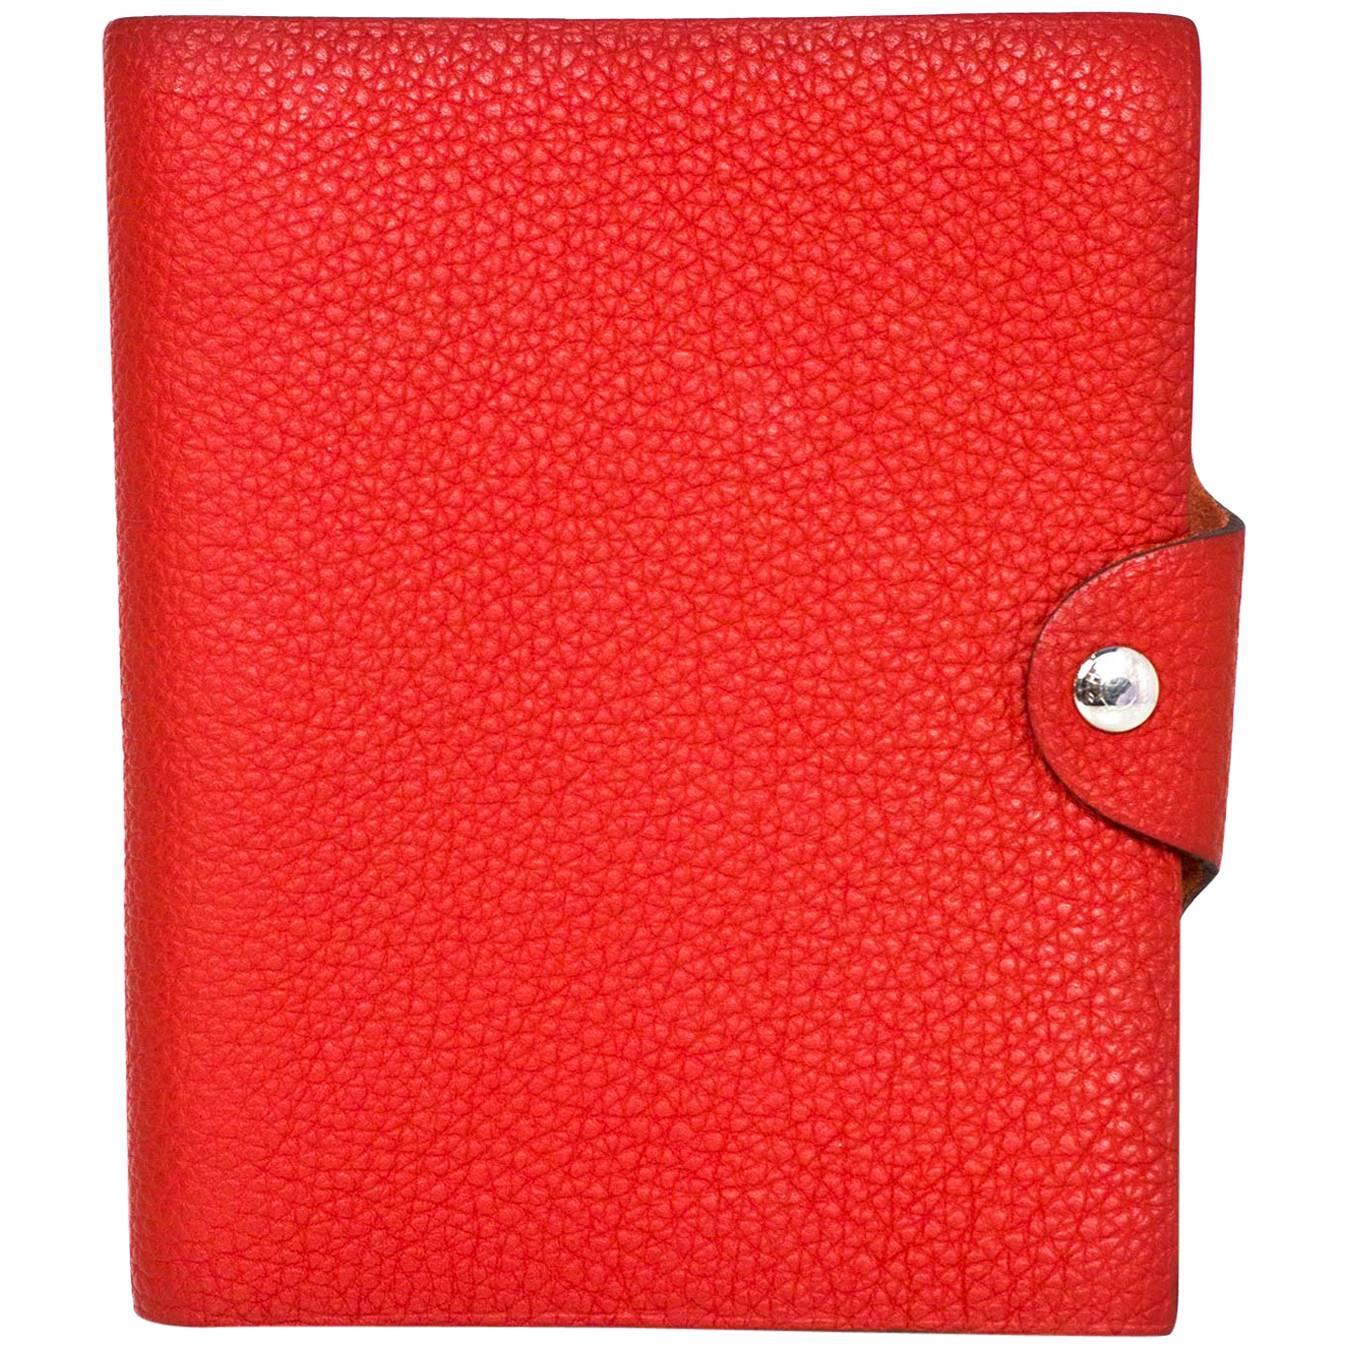 Hermes Red Togo Leather Ulysse PM Notebook Cover w/ Insert